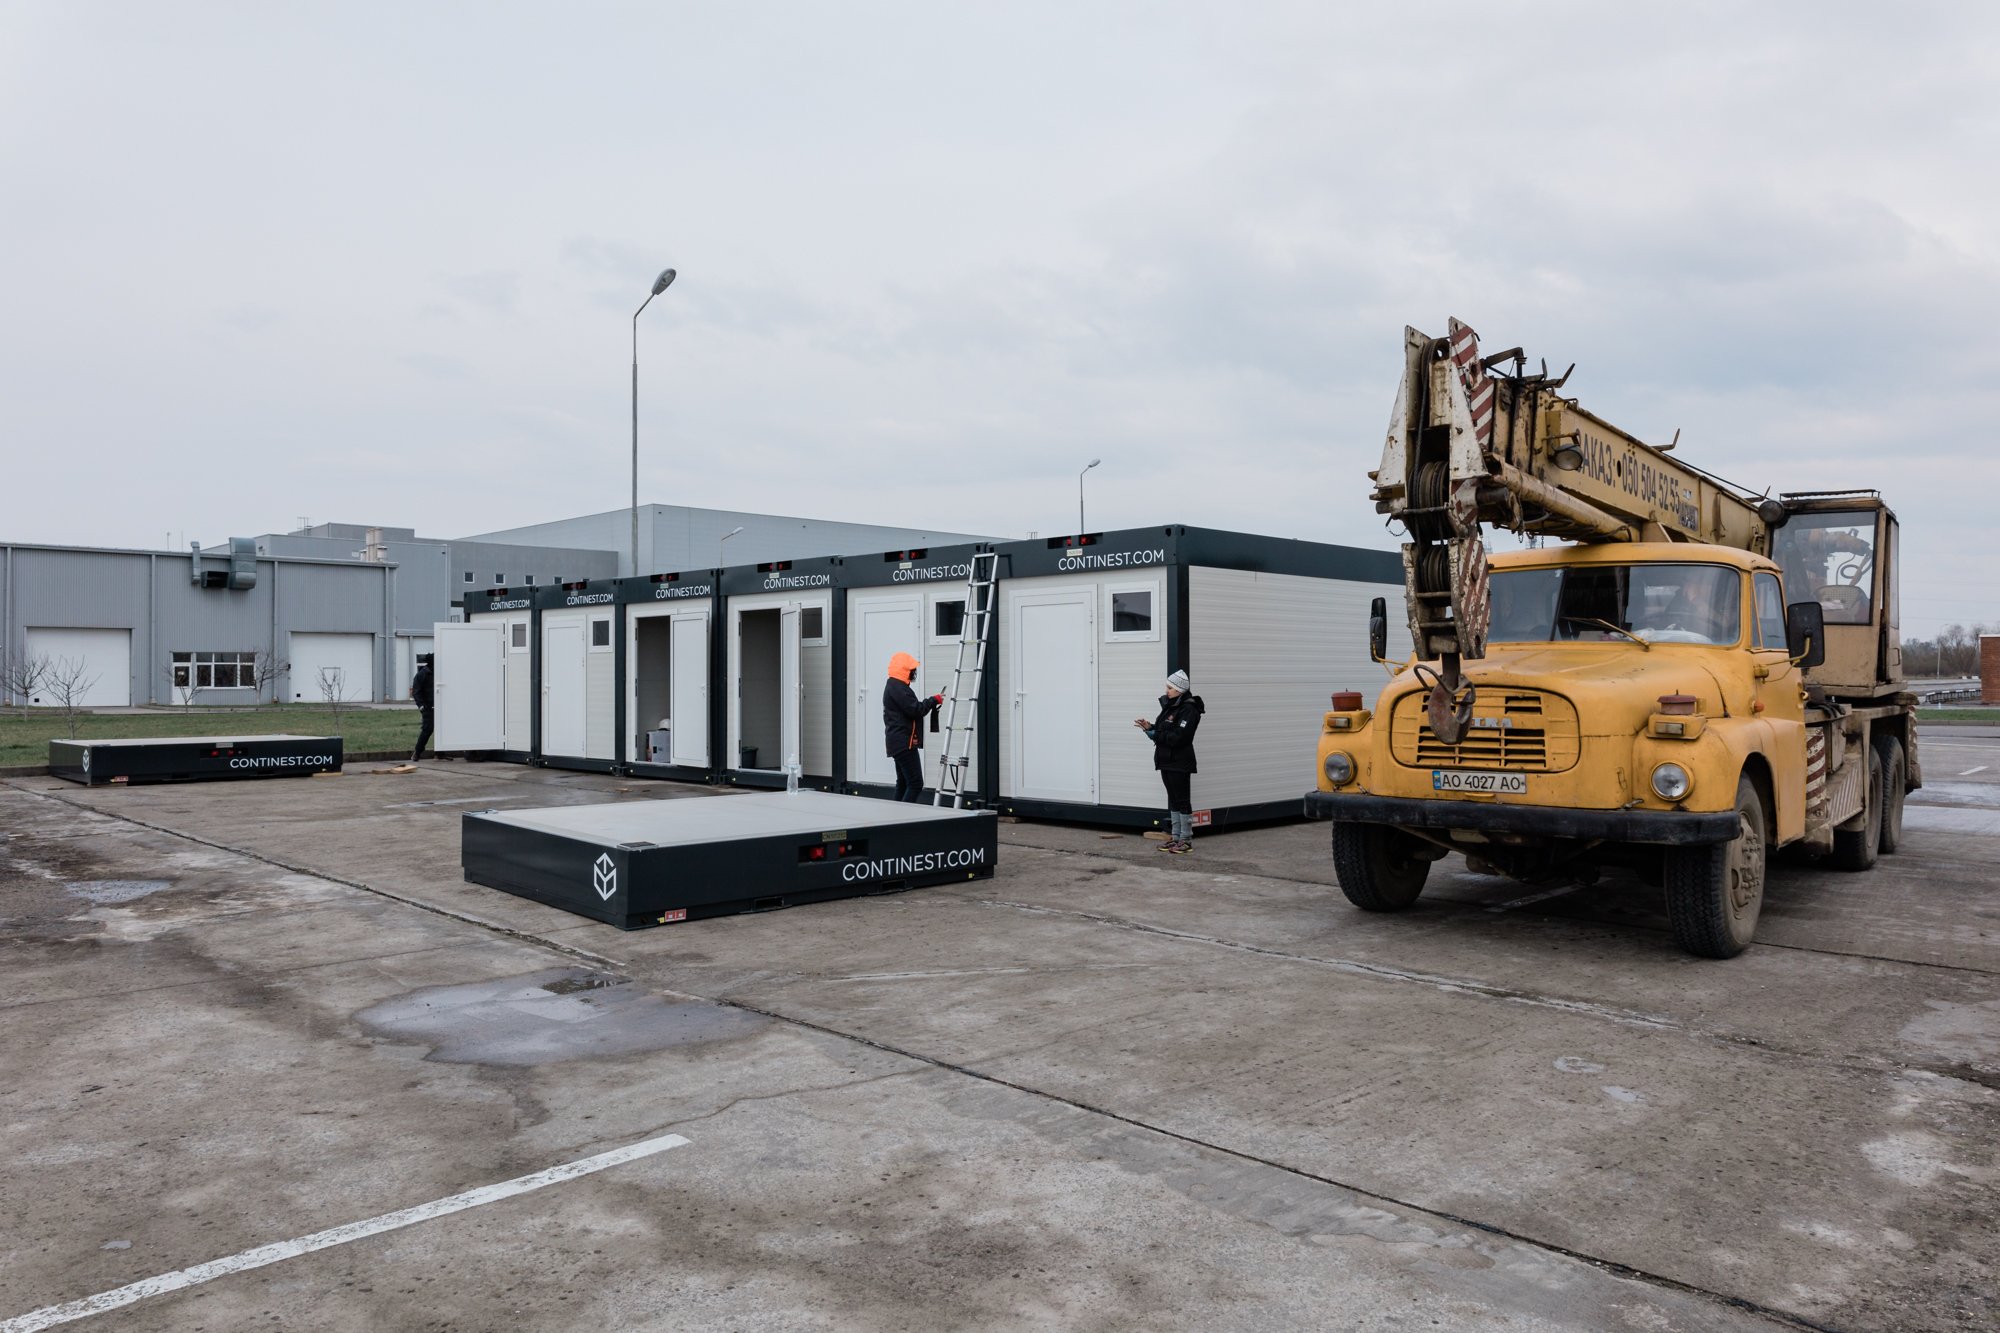 The modular houses will provide temporary homes for refugees.